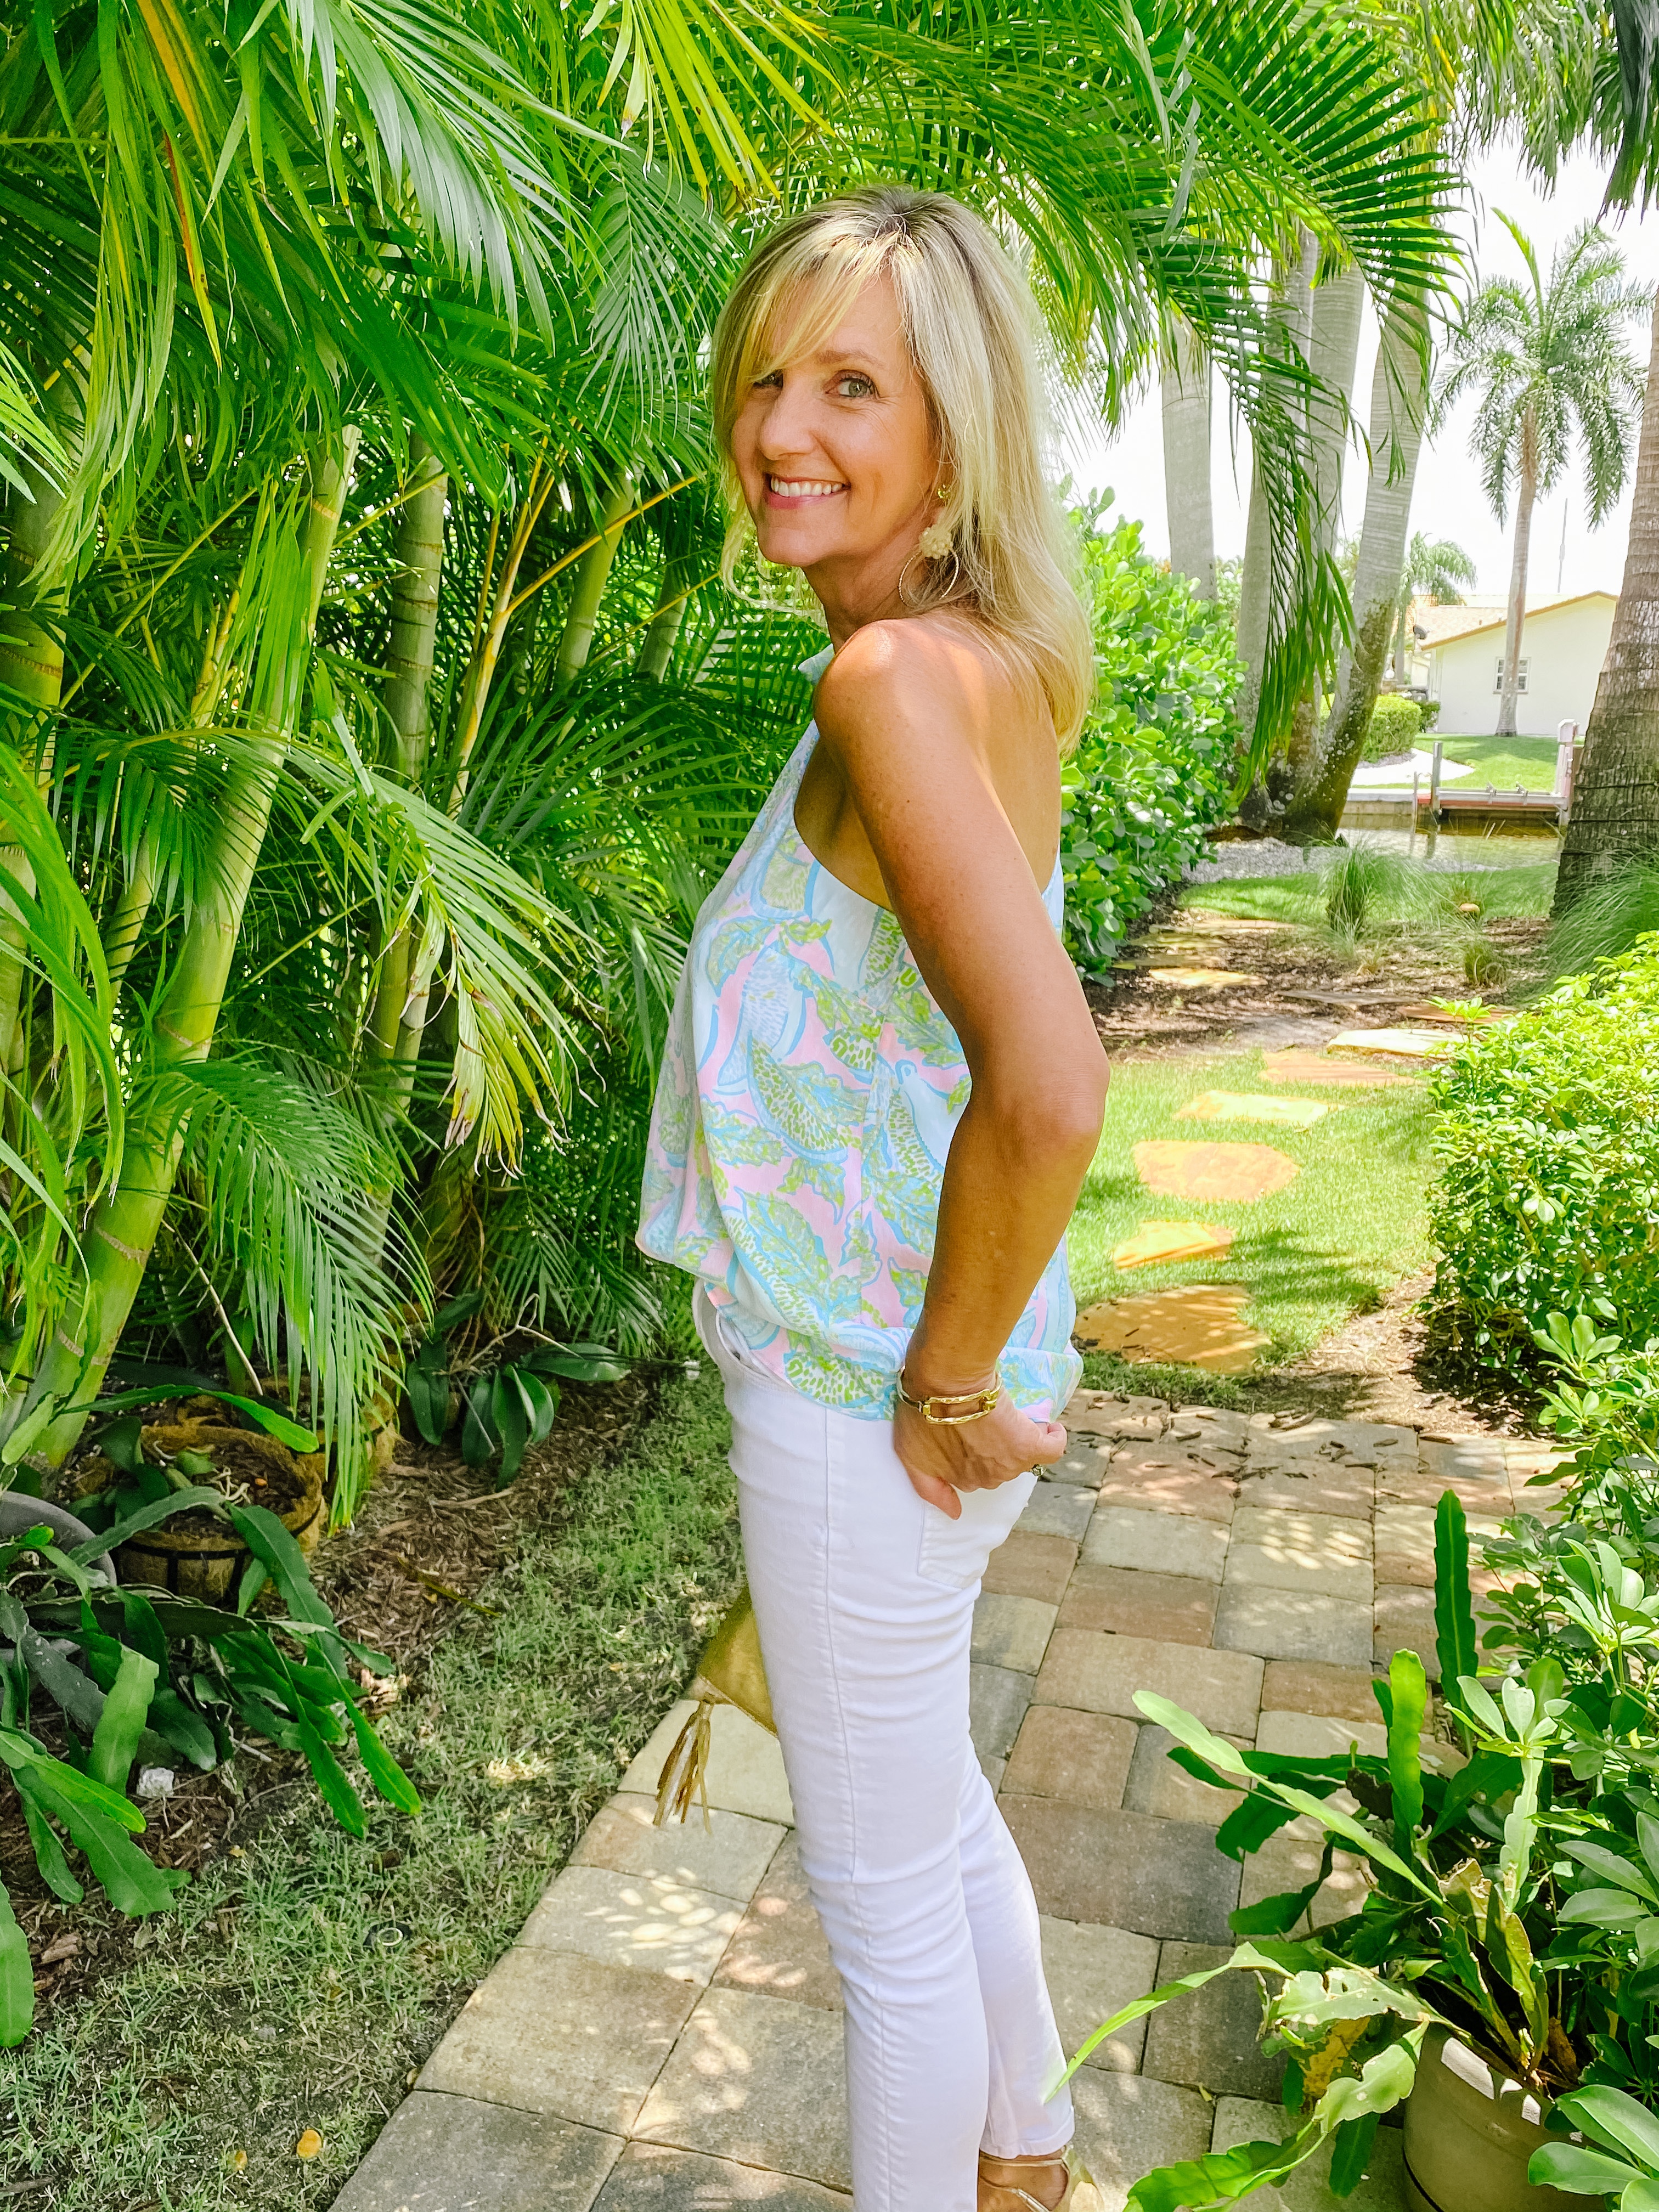 White Jeans For Date Night! 5 outfit ideas for women over 50.